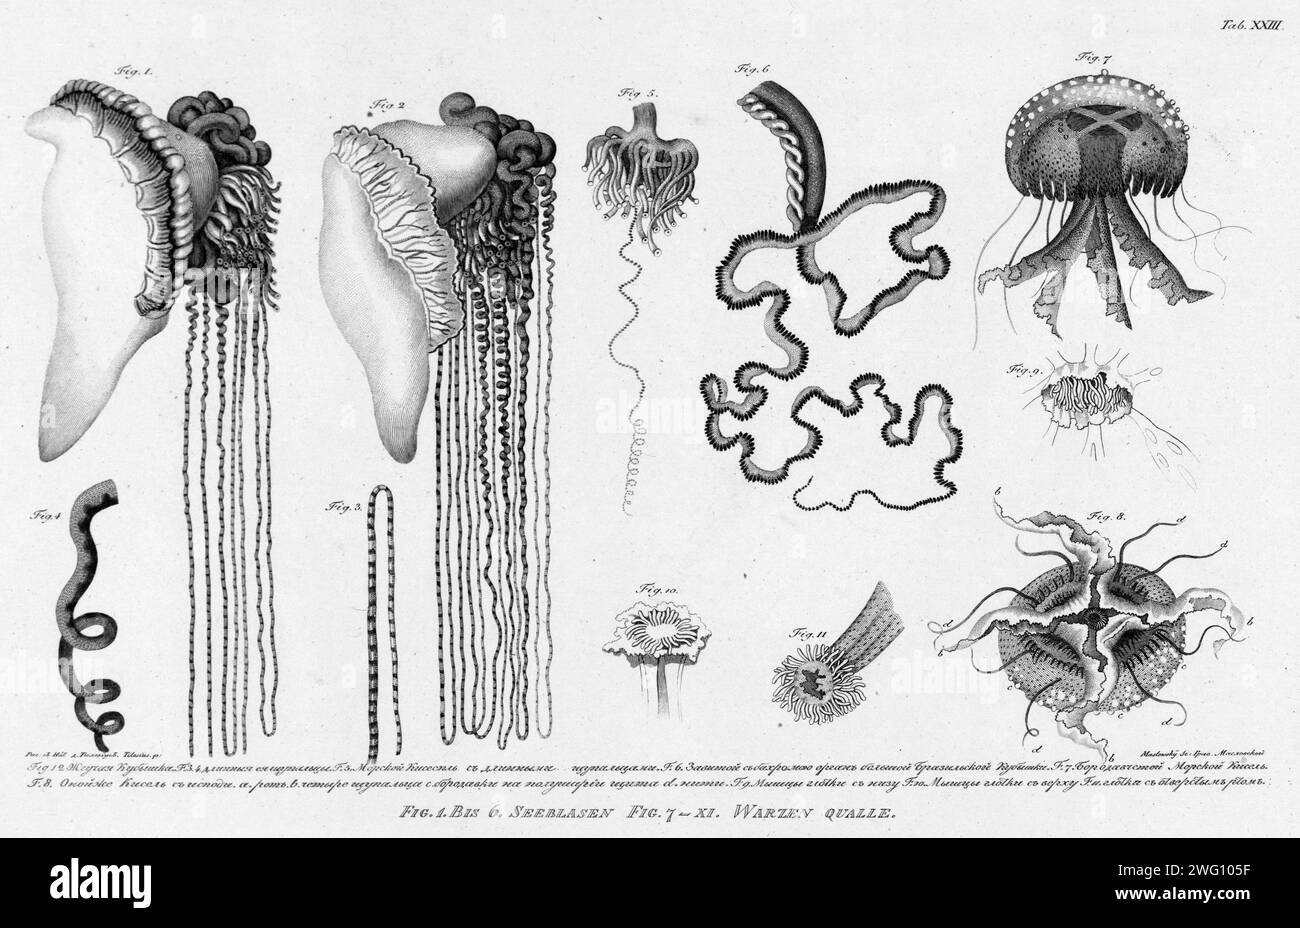 Fig.1.2. Stinging Cubomedusae; F.3.4. Its Long Tentacles; F. 5. Sea Medusae with Long Tentacles; F.6. Curly Fringe of a Large Brazilian Cubomedusae; F.7.Warty Sea Medusae; F.8. The Same Medusae From Inside - A/ Mouth B/ Four Tentacles C/ Warts on Its Hemisphere D/ Threads; F.9. Muscles of Gullet From Below; F.10. Muscles of Gullet From Above; F.11. Gullet with Open Mouth., 1813. In 1803-06, Captain I. F. Kruzenshtern became the first Russian to circumnavigate the globe. This atlas, published by the Russian Academy of Sciences in 1813, includes maps of Kruzenshtern's route and 109 plates based Stock Photo